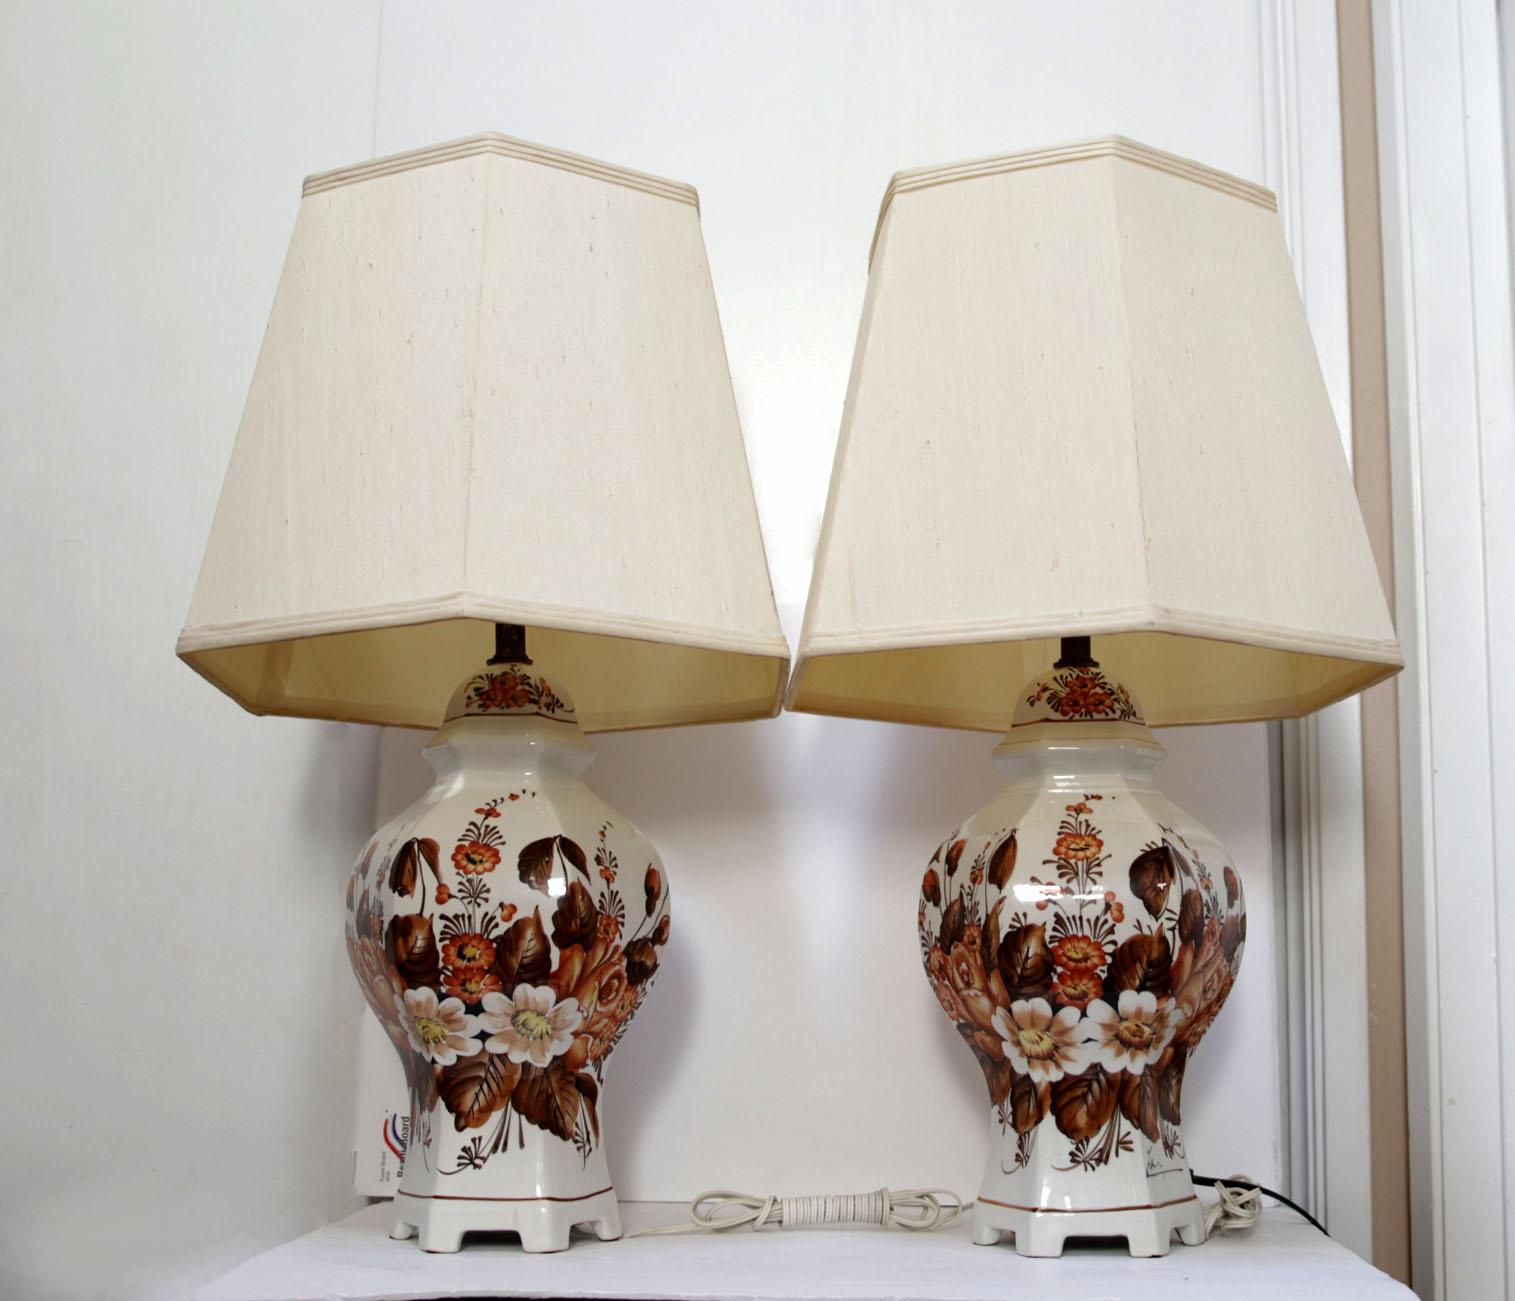 This lamps are from the Northern Italian center for ceramics, Ancora. .A pair of vintage Italian hand-painted porcelain hexagonal table lamps are
decorated and signed by the artist, Antonio Zen, Made in Ancora, Italy, 1940-1960. Lamps are oversized